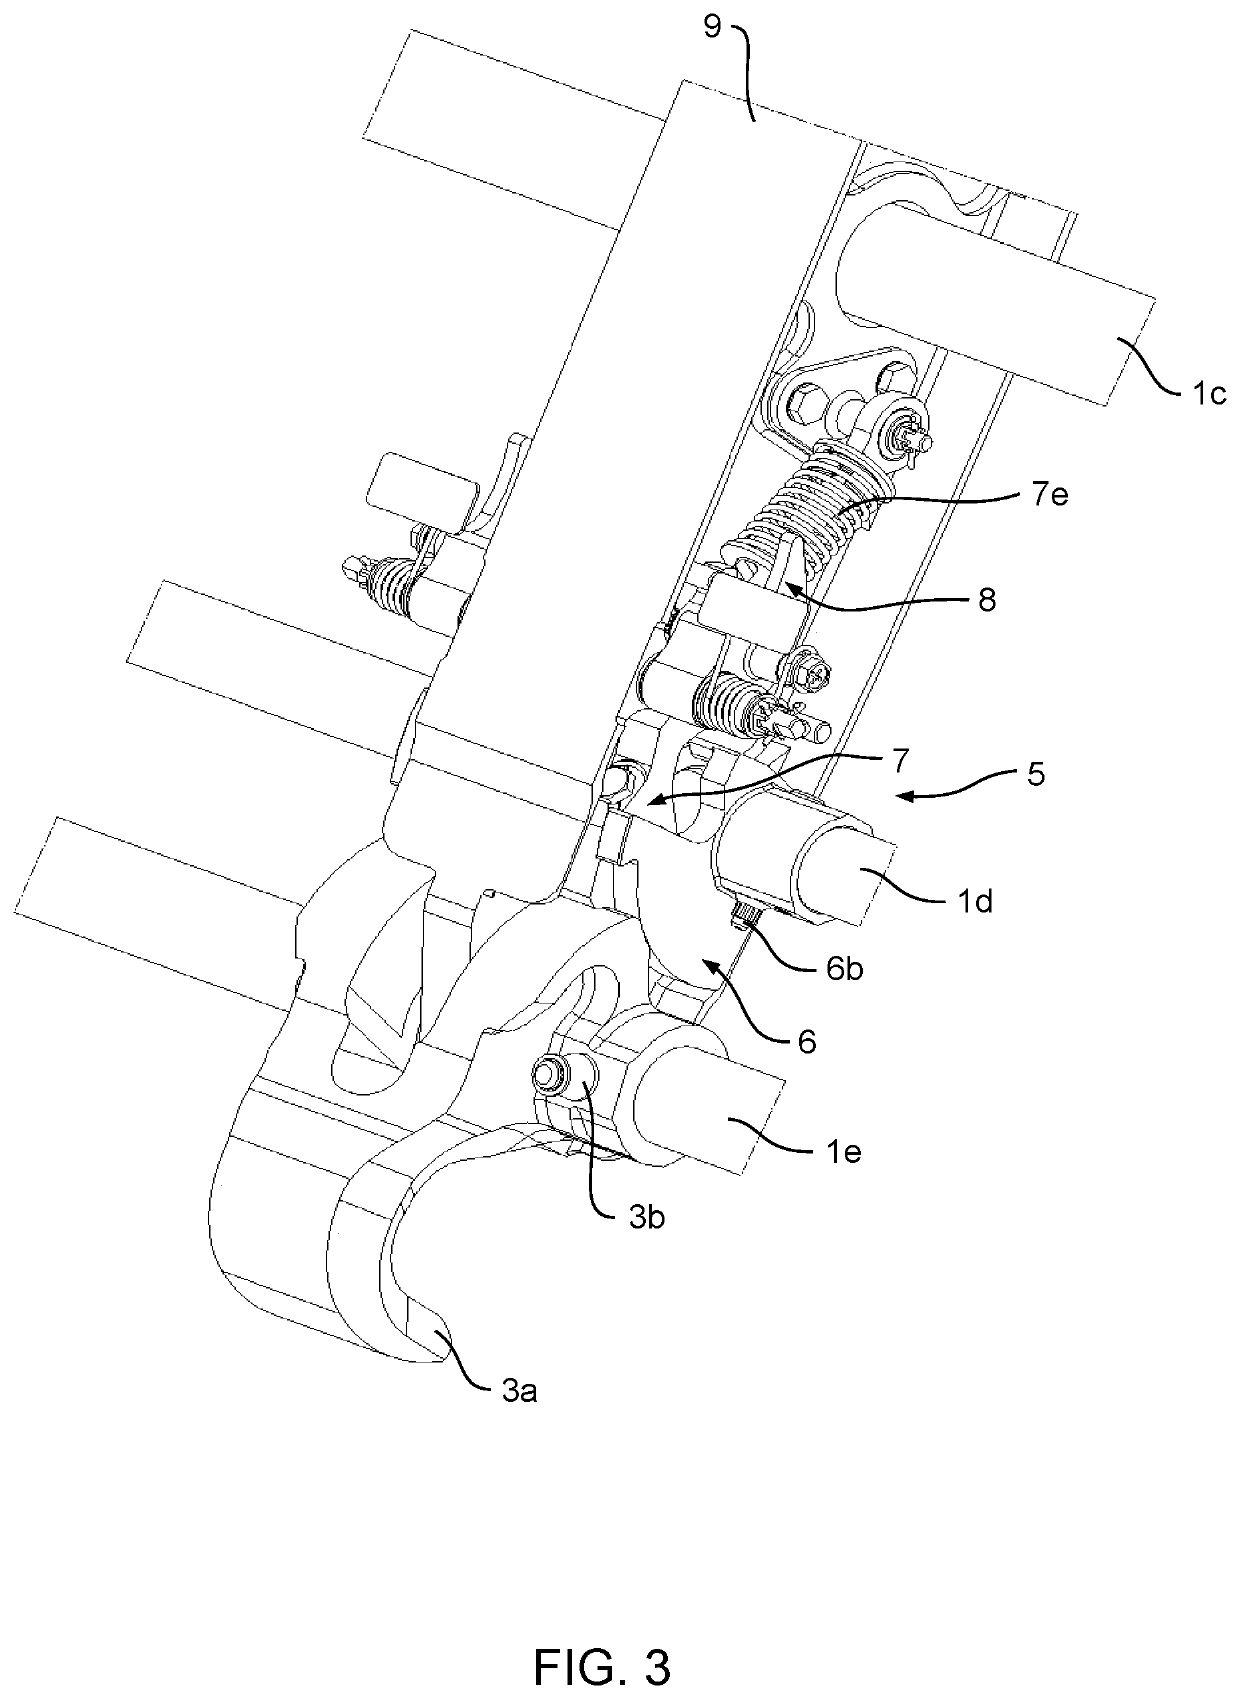 Actuating system for an actuatable door